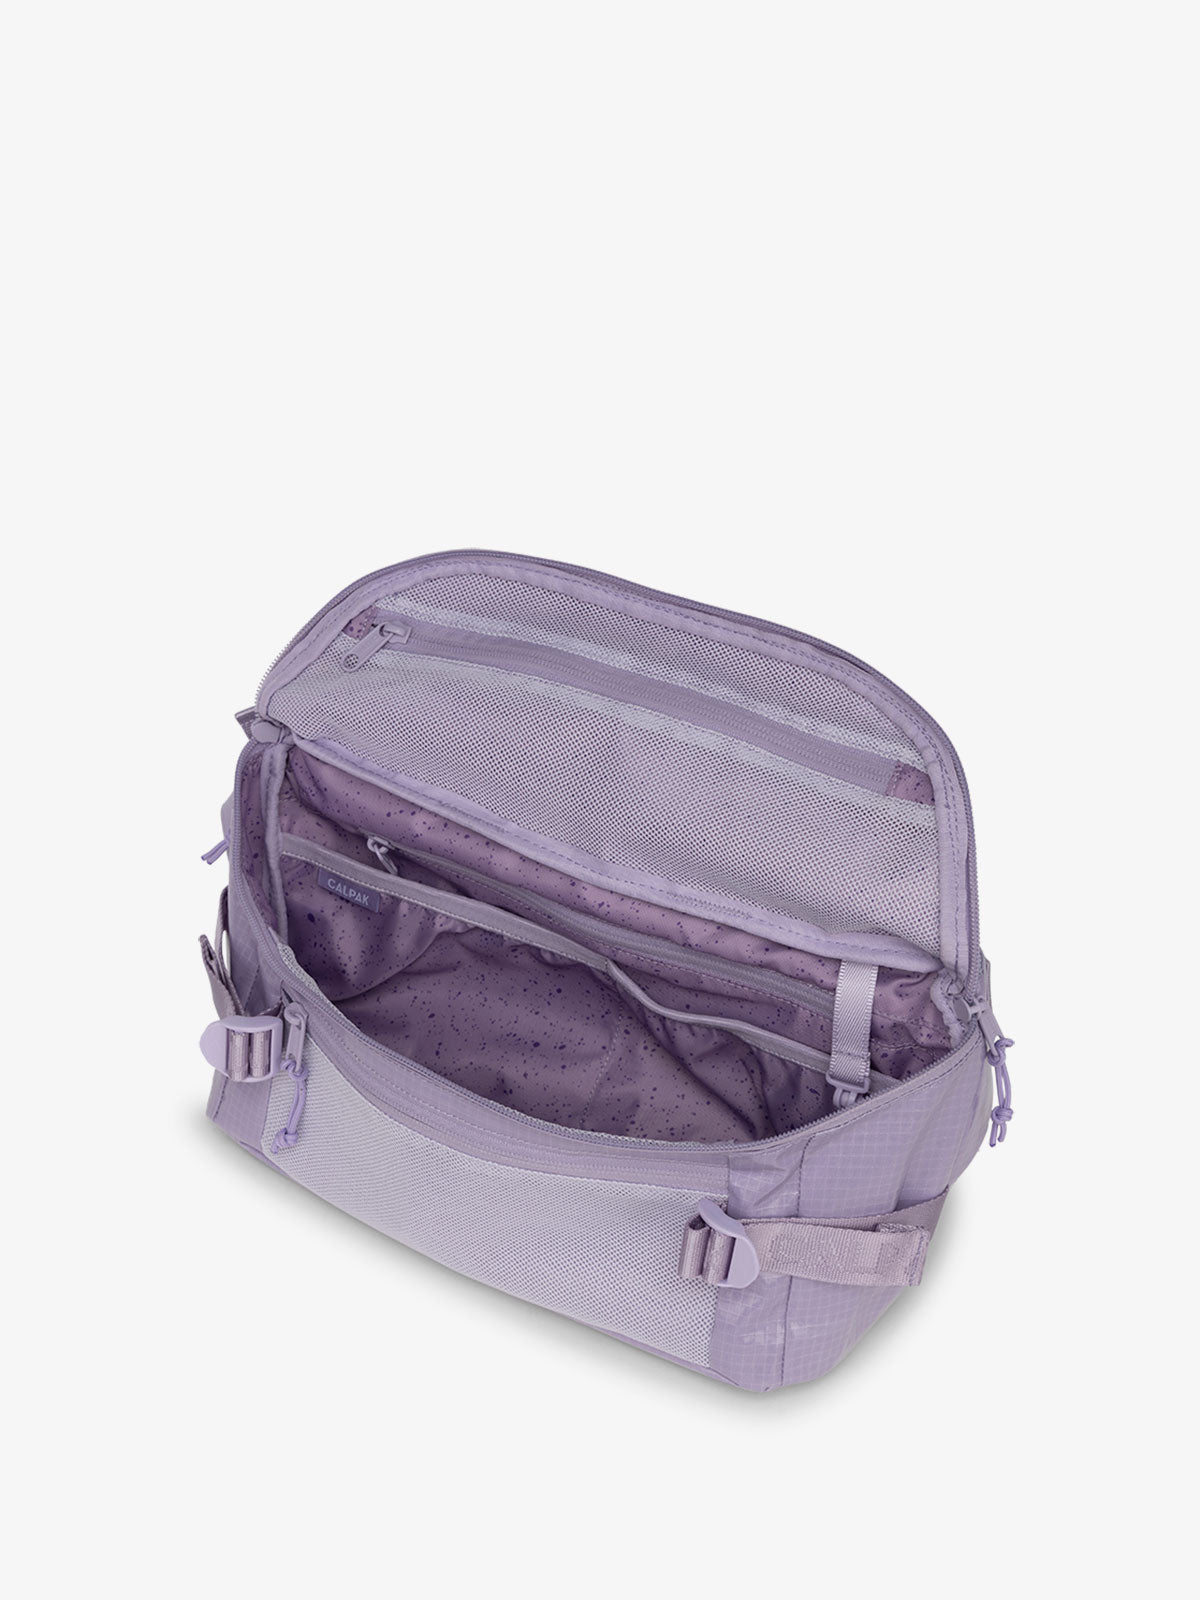 CALPAK Terra Sling Crossbody Bag for hiking with multiple pockets and adjustable straps in purple